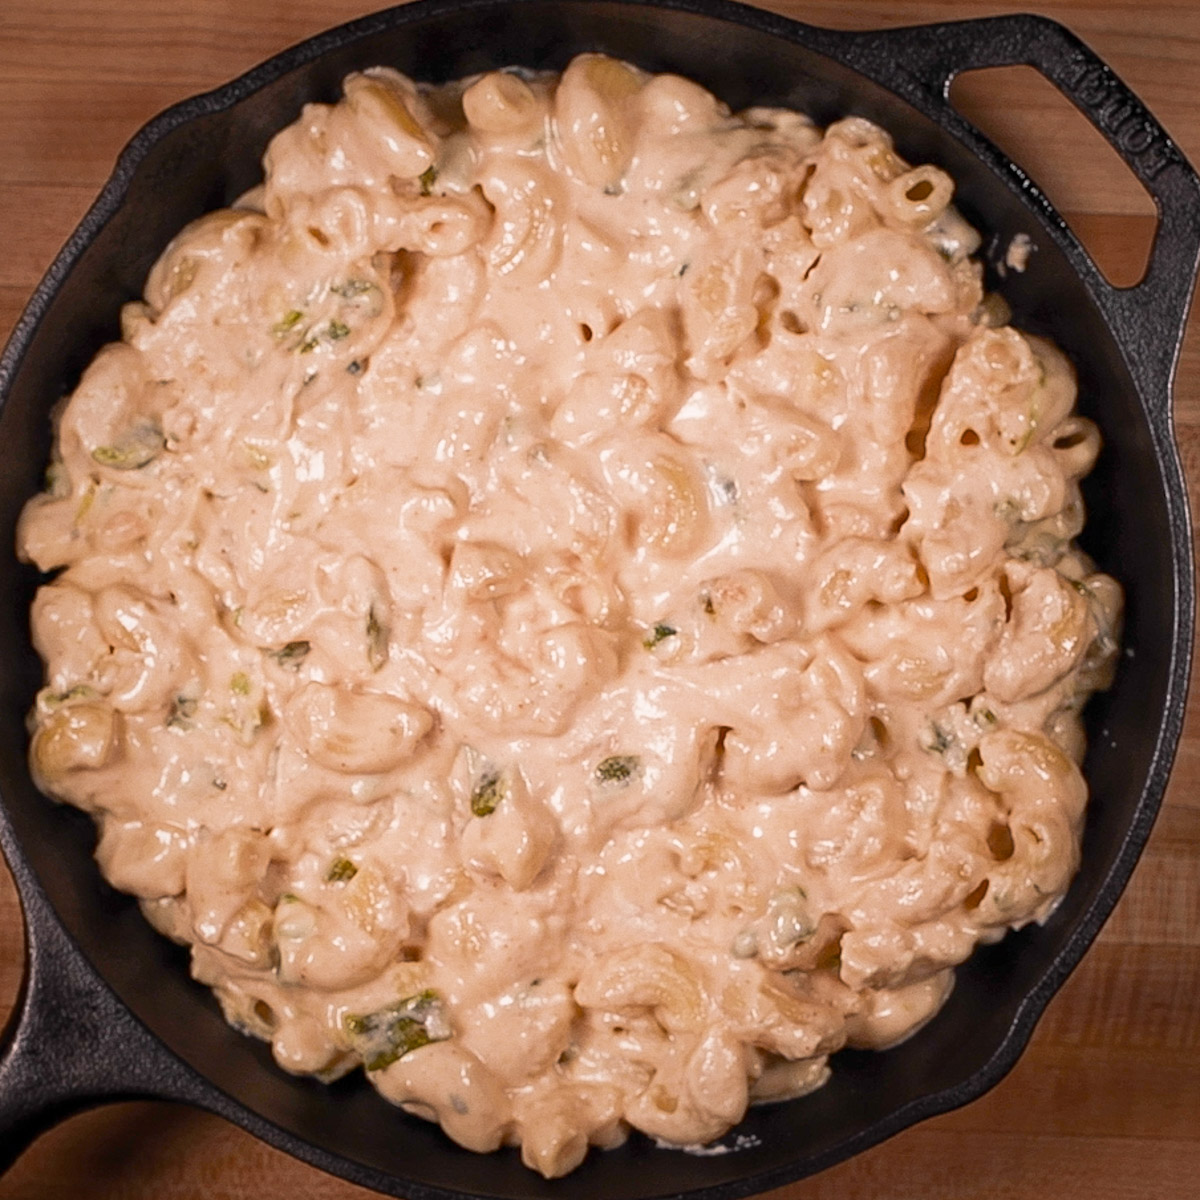 Transfer mac and cheese to a cast iron skillet.